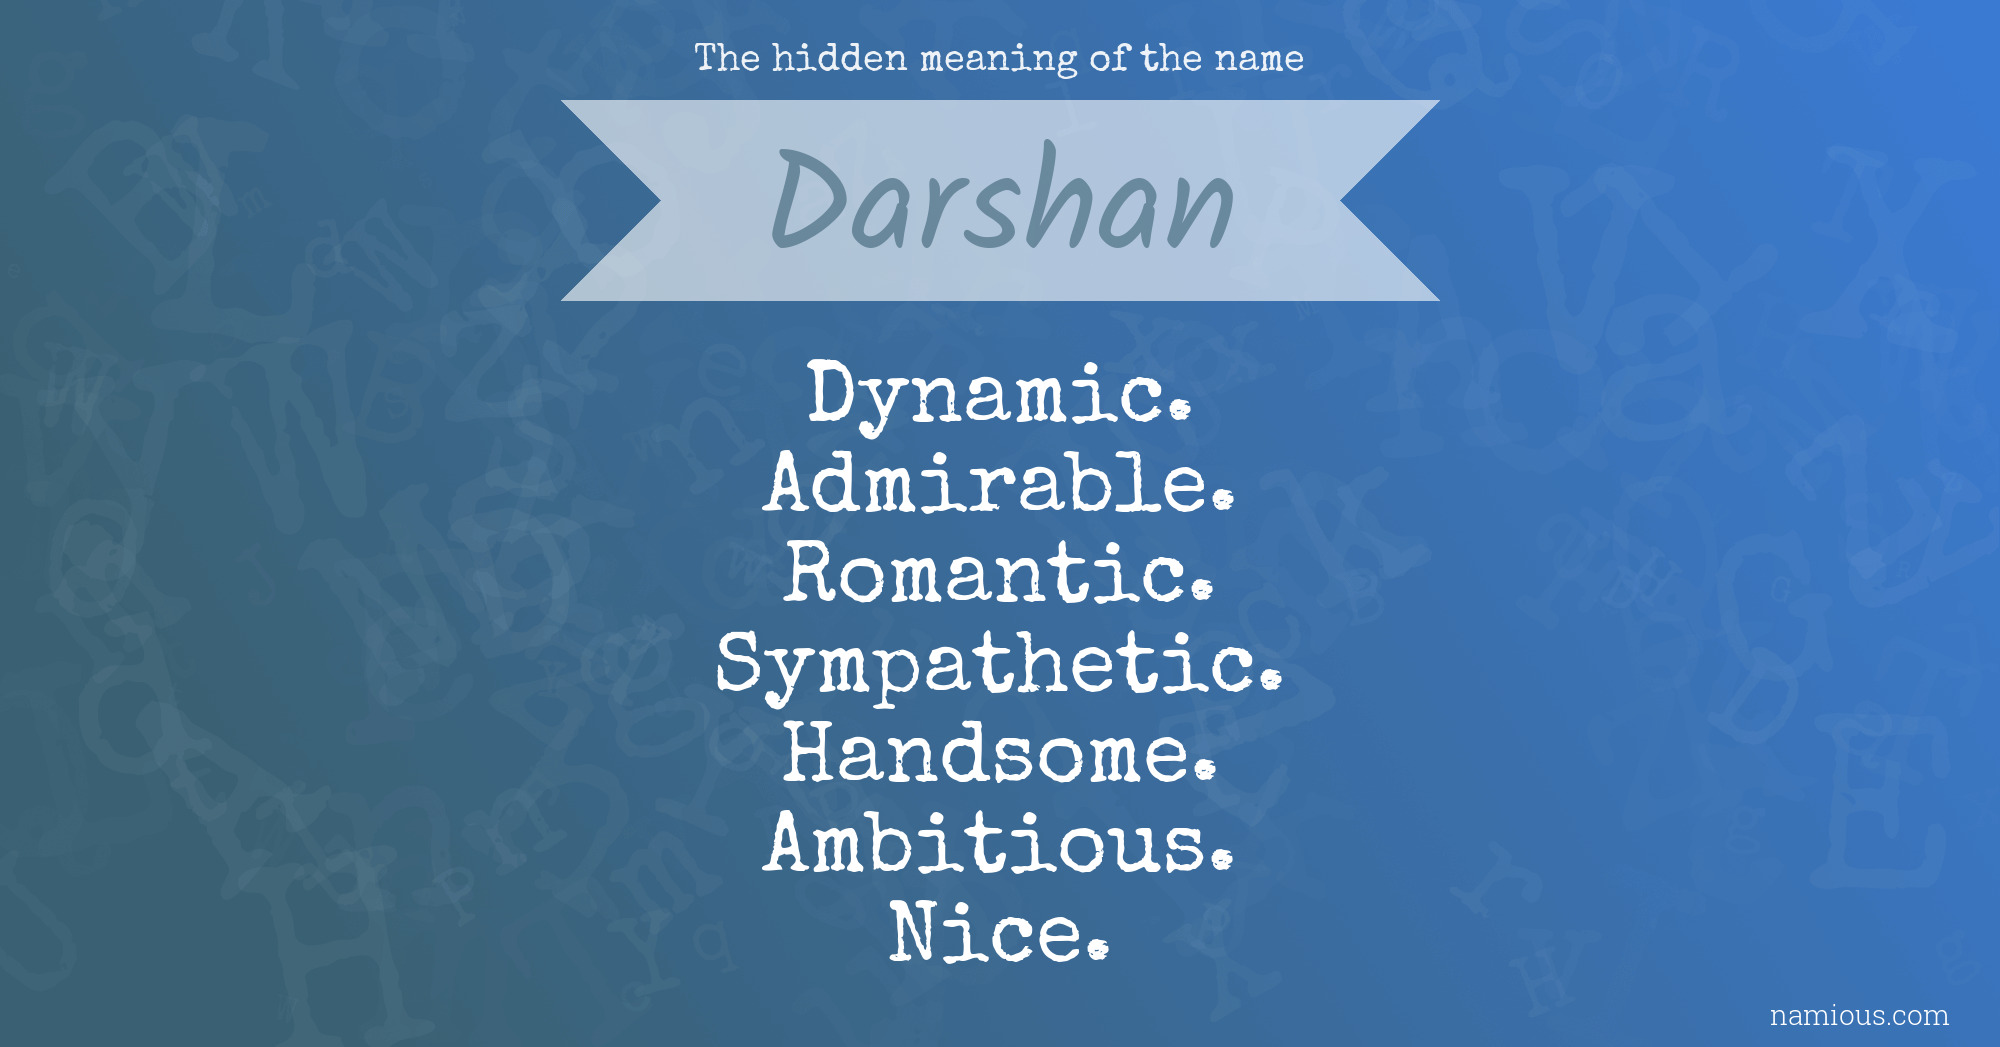 The hidden meaning of the name Darshan